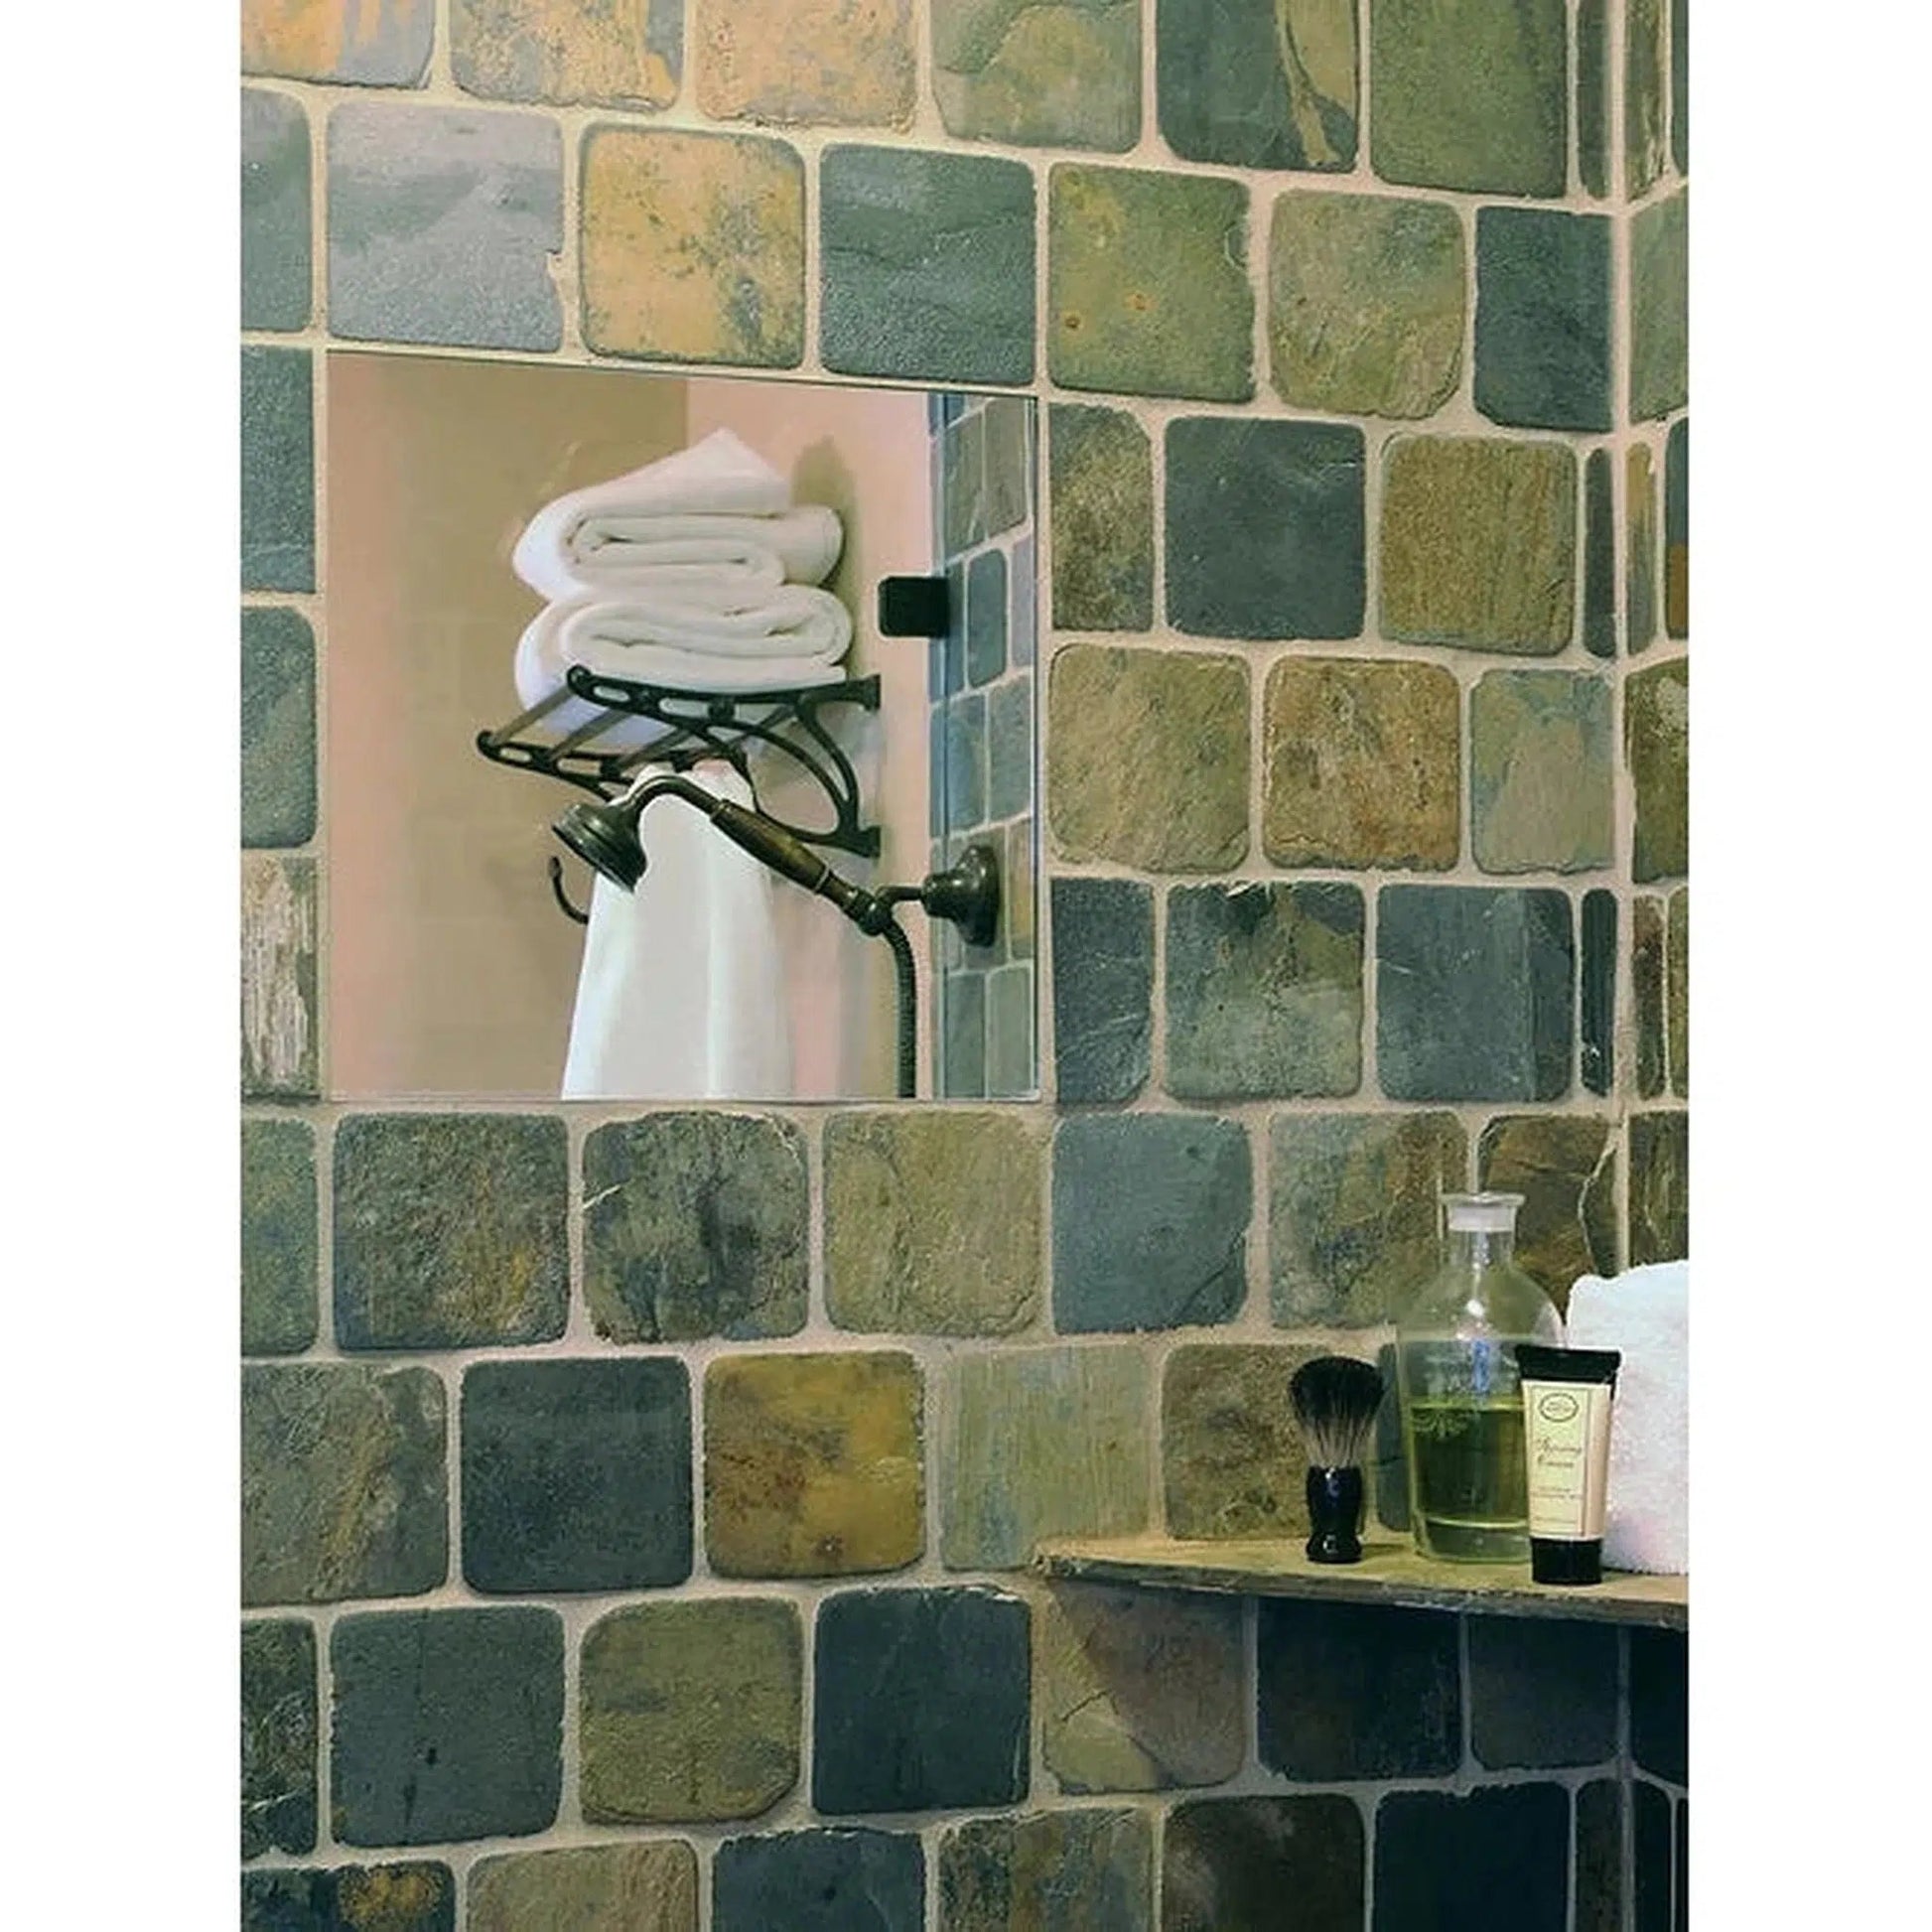 ClearMirror 12" x 24" Fog-Free Wall-Mounted Shower Mirror With Heating Pad